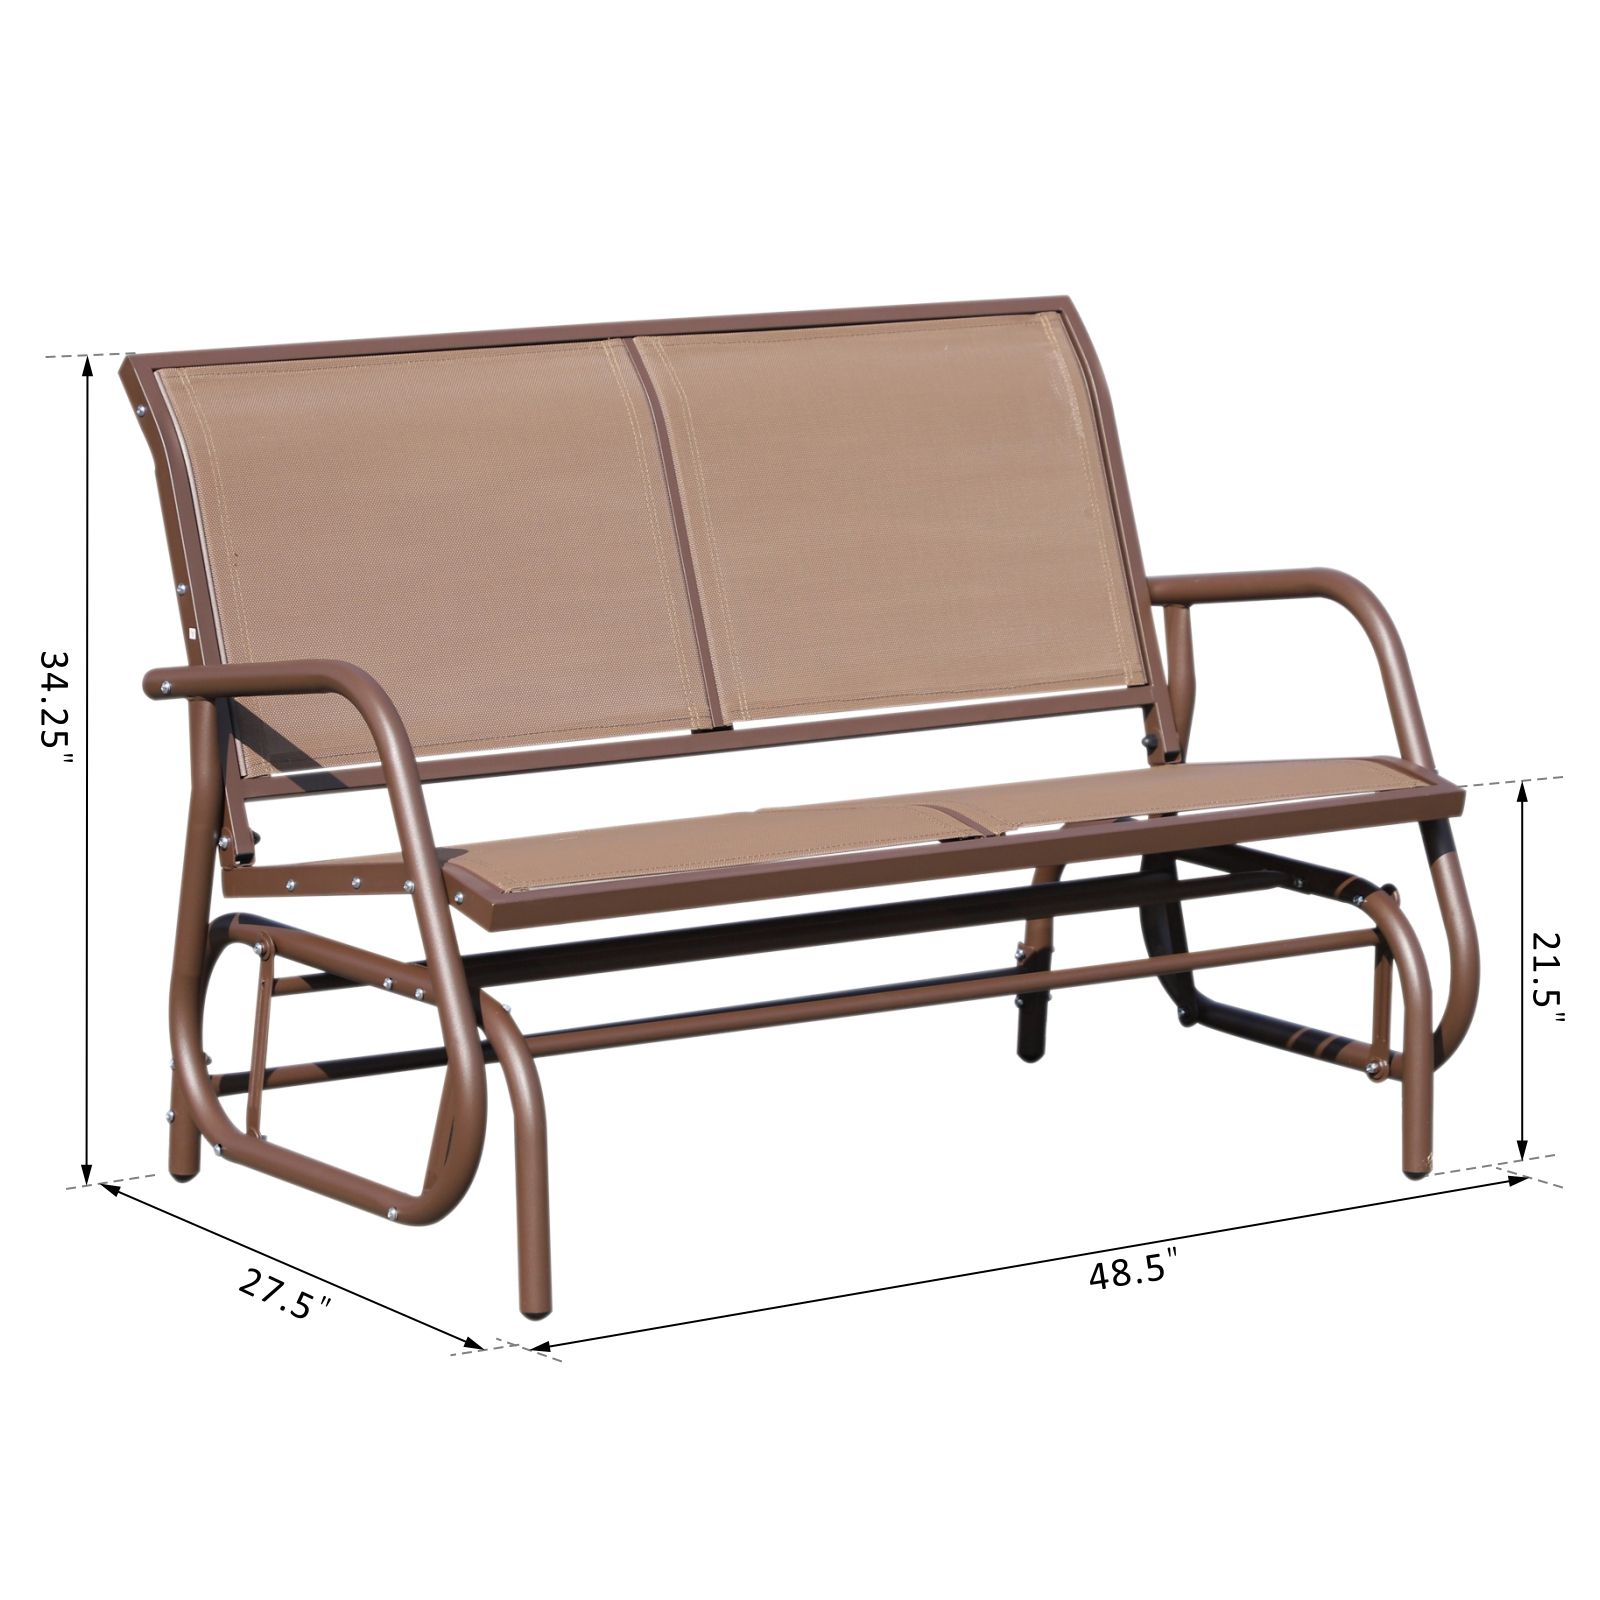 Outsunny Patio Double Glider Outdoor Steel Sling Fabric Bench Swing Chair R  Heavy Duty Porch Rocker Garden Loveseat Brown For Outdoor Fabric Glider Benches (View 12 of 25)